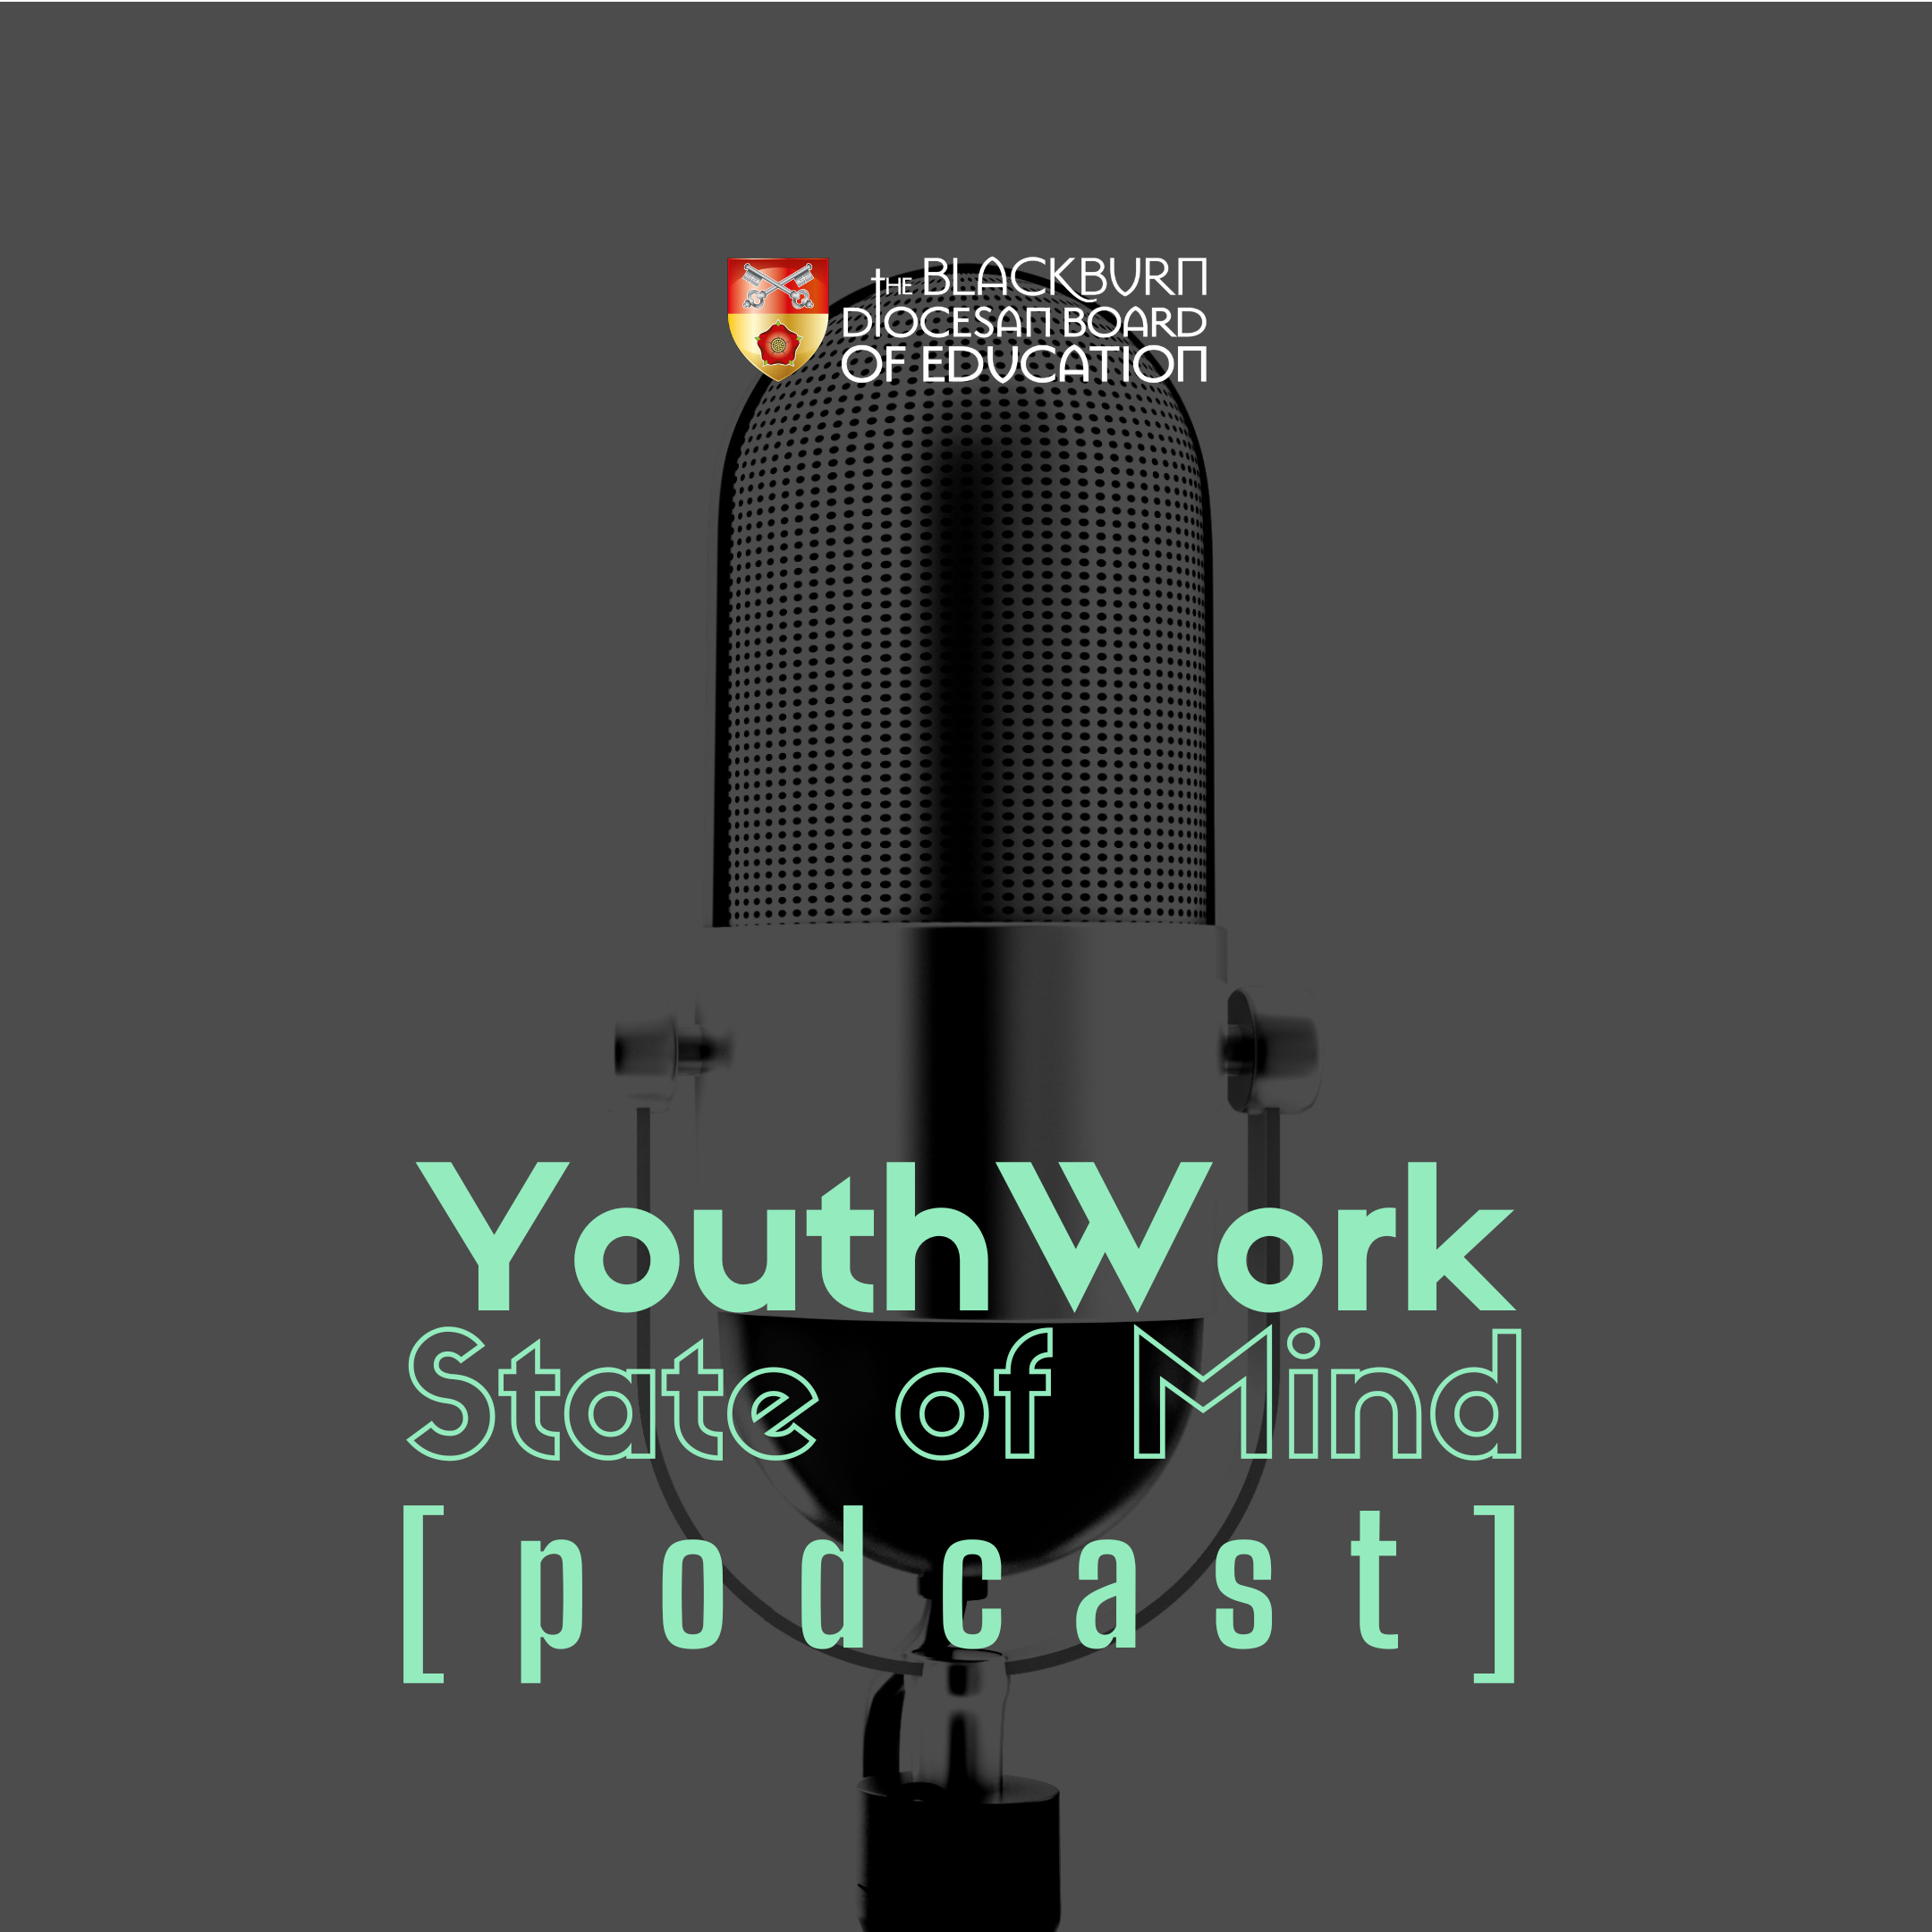 010 How do we start youth ministry from scratch?